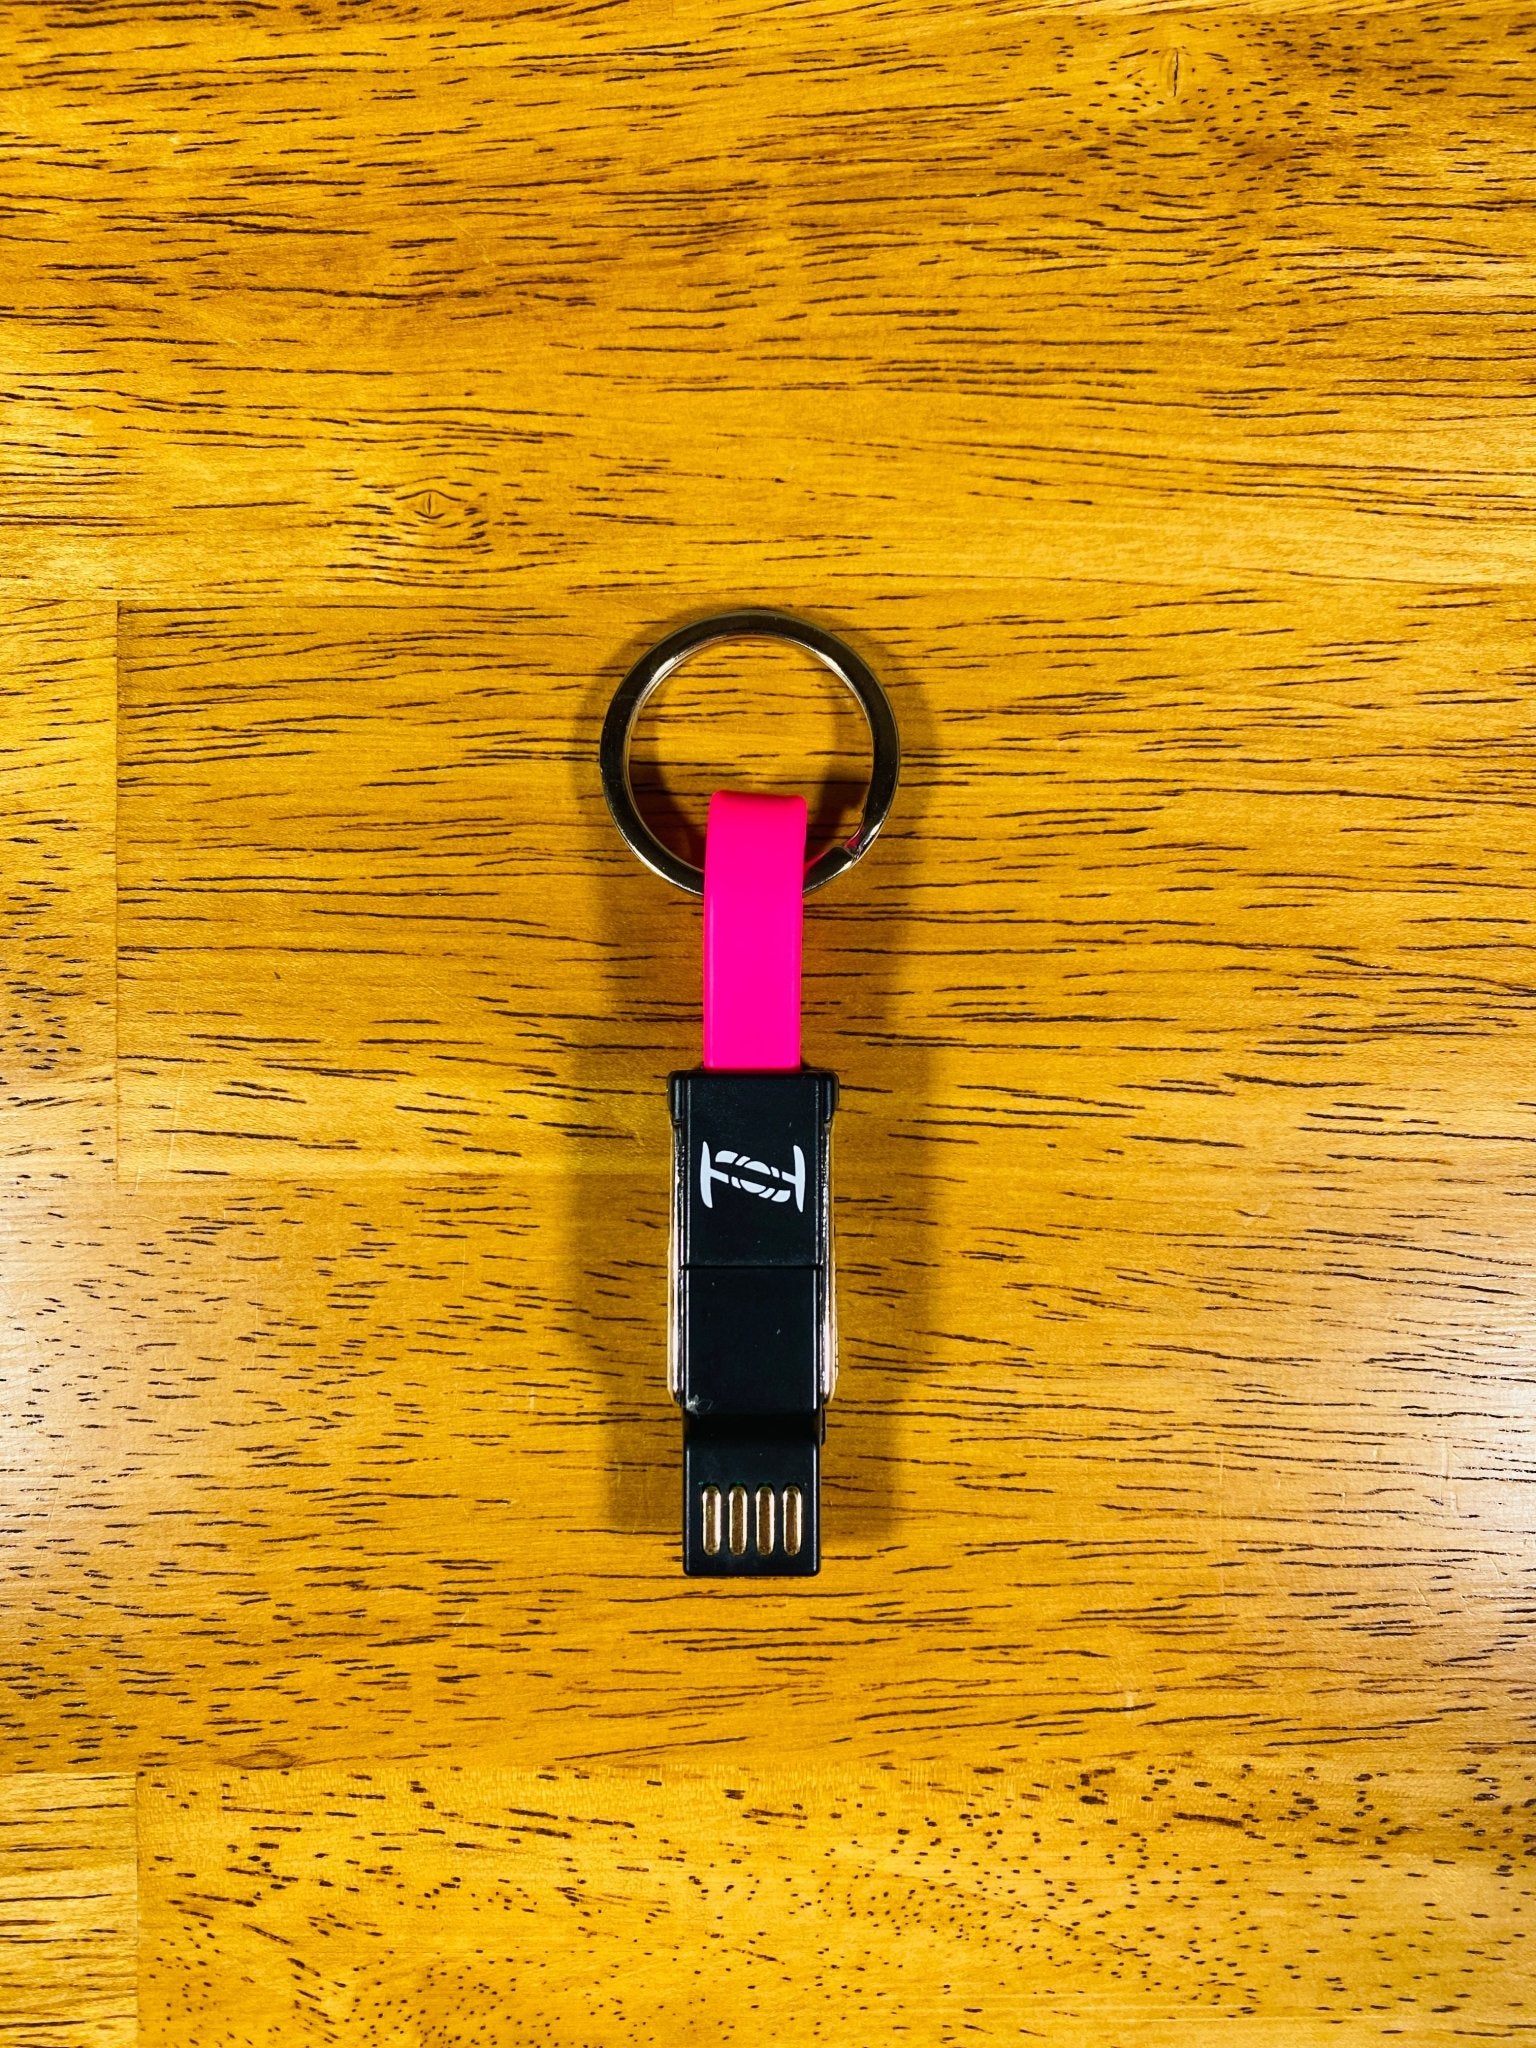 6 in 1 Keychain Charging Cord - Tap Tag